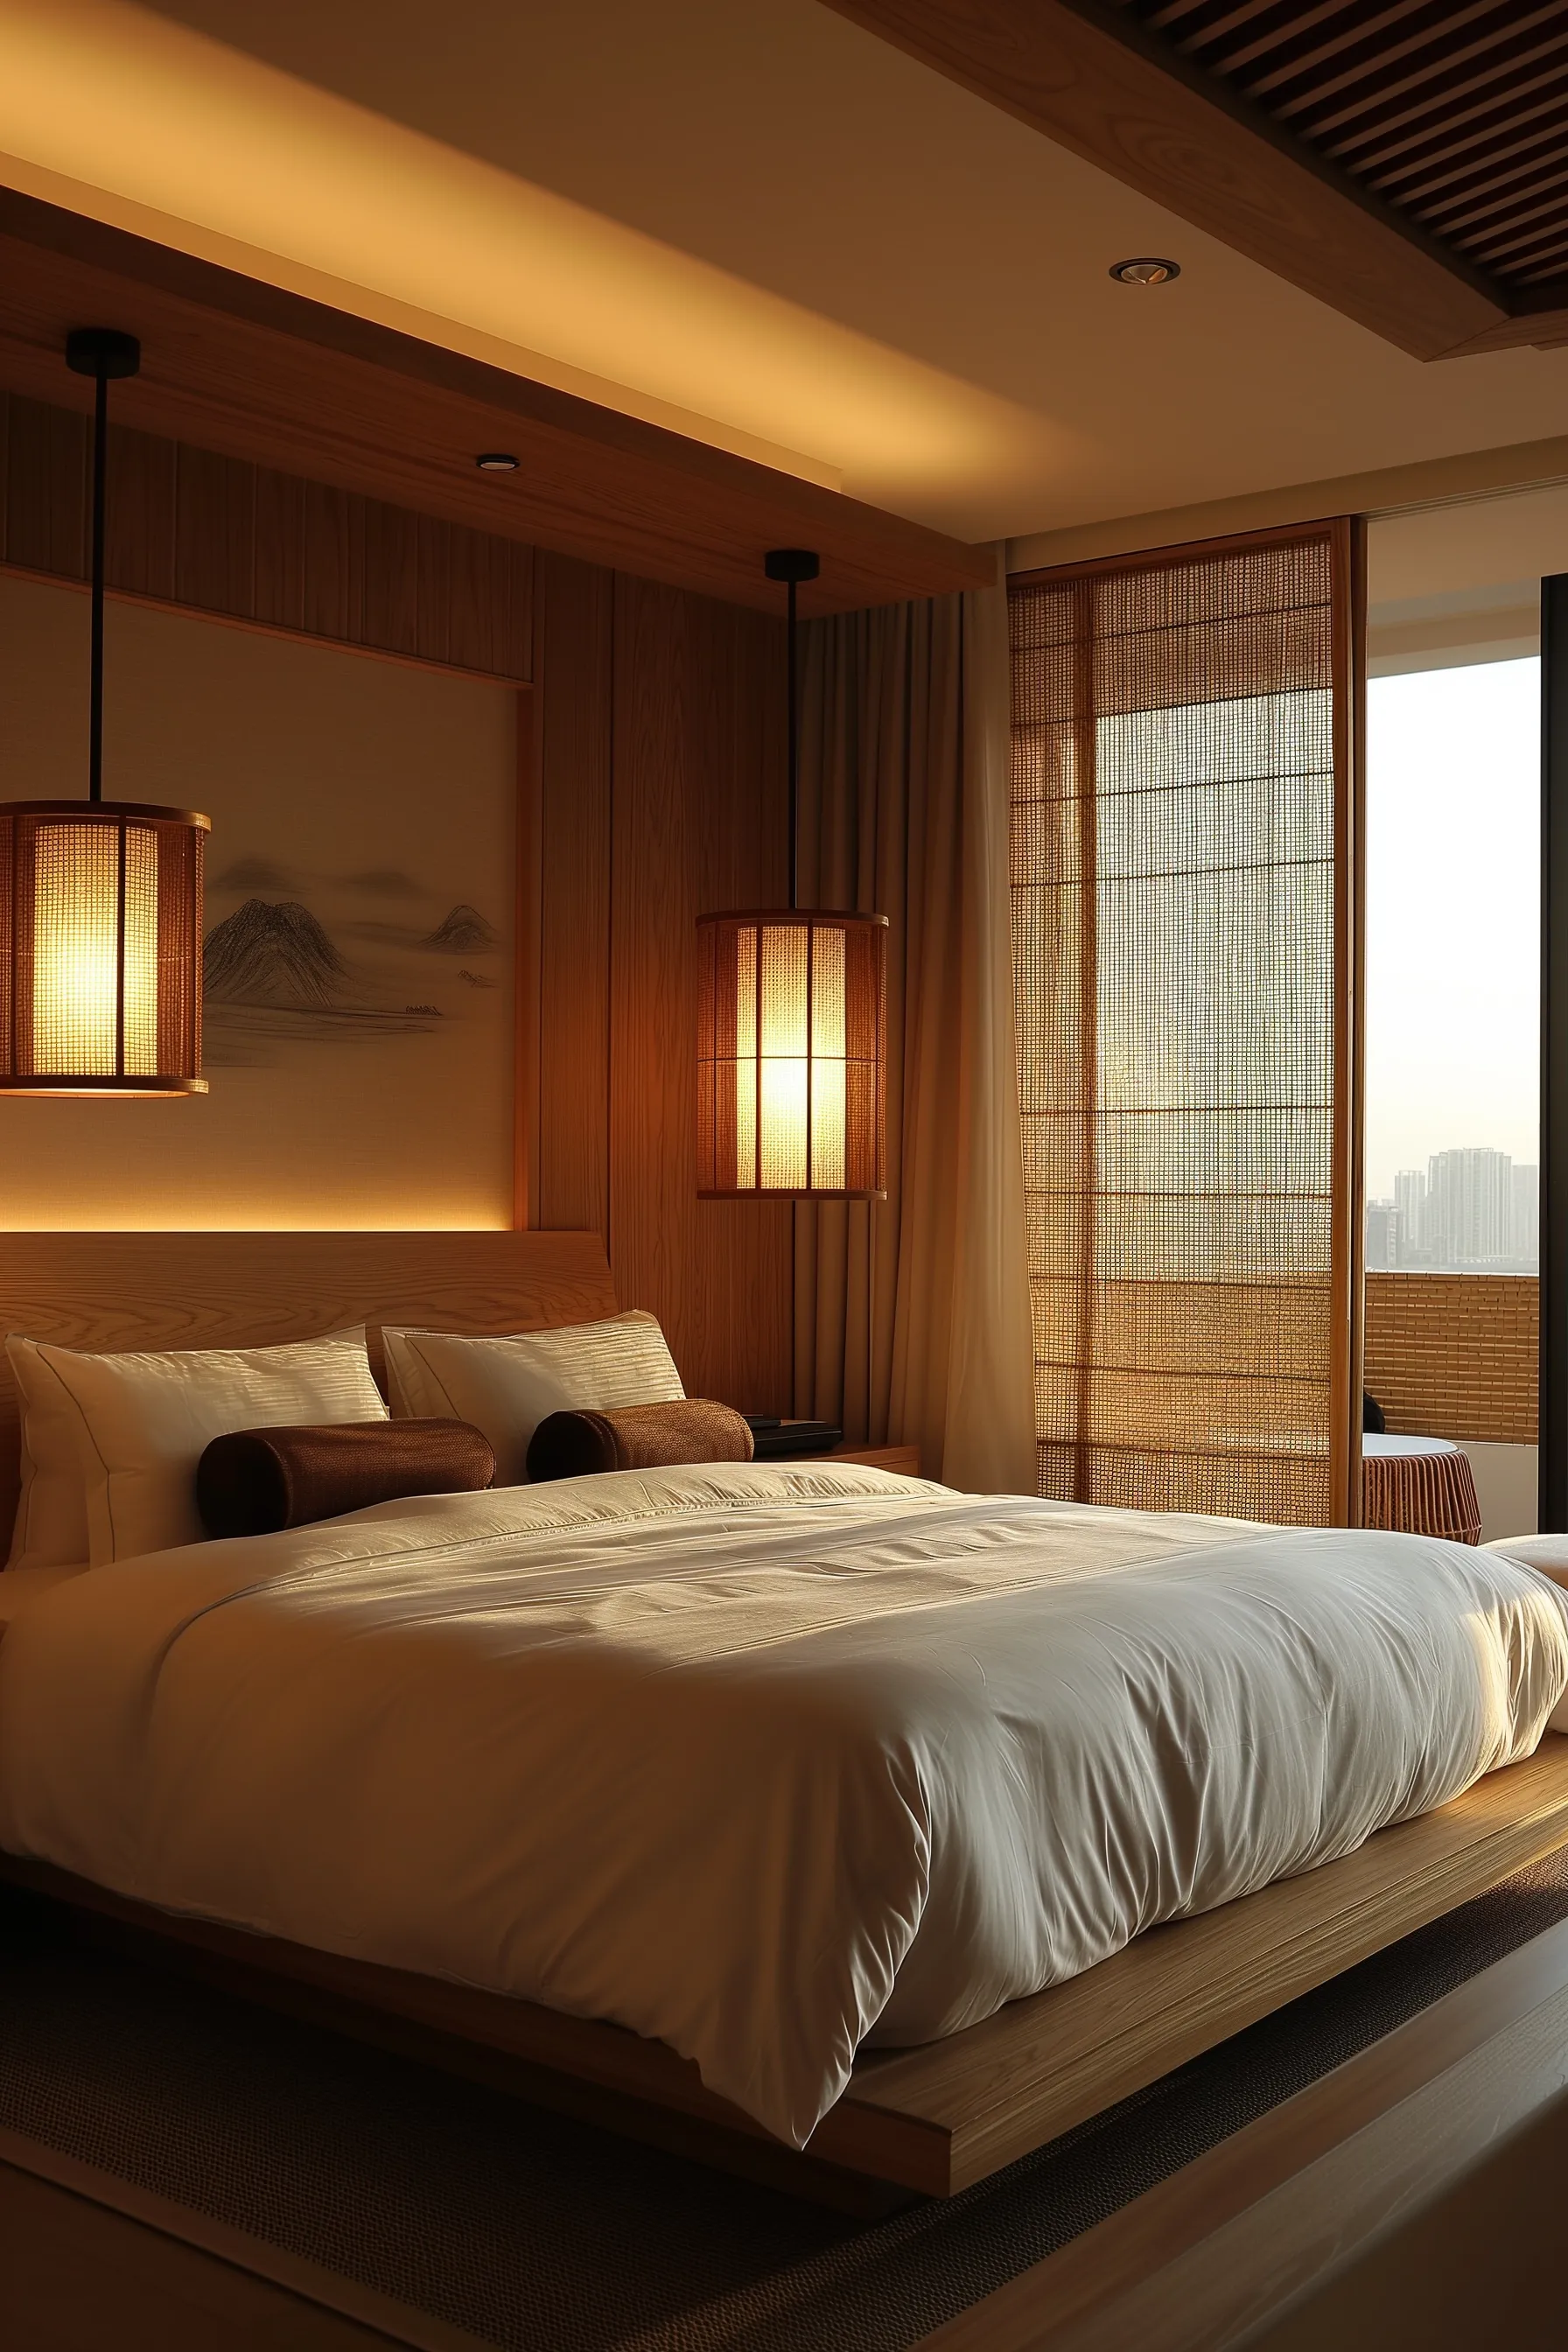 A warm bedroom with lantern lights